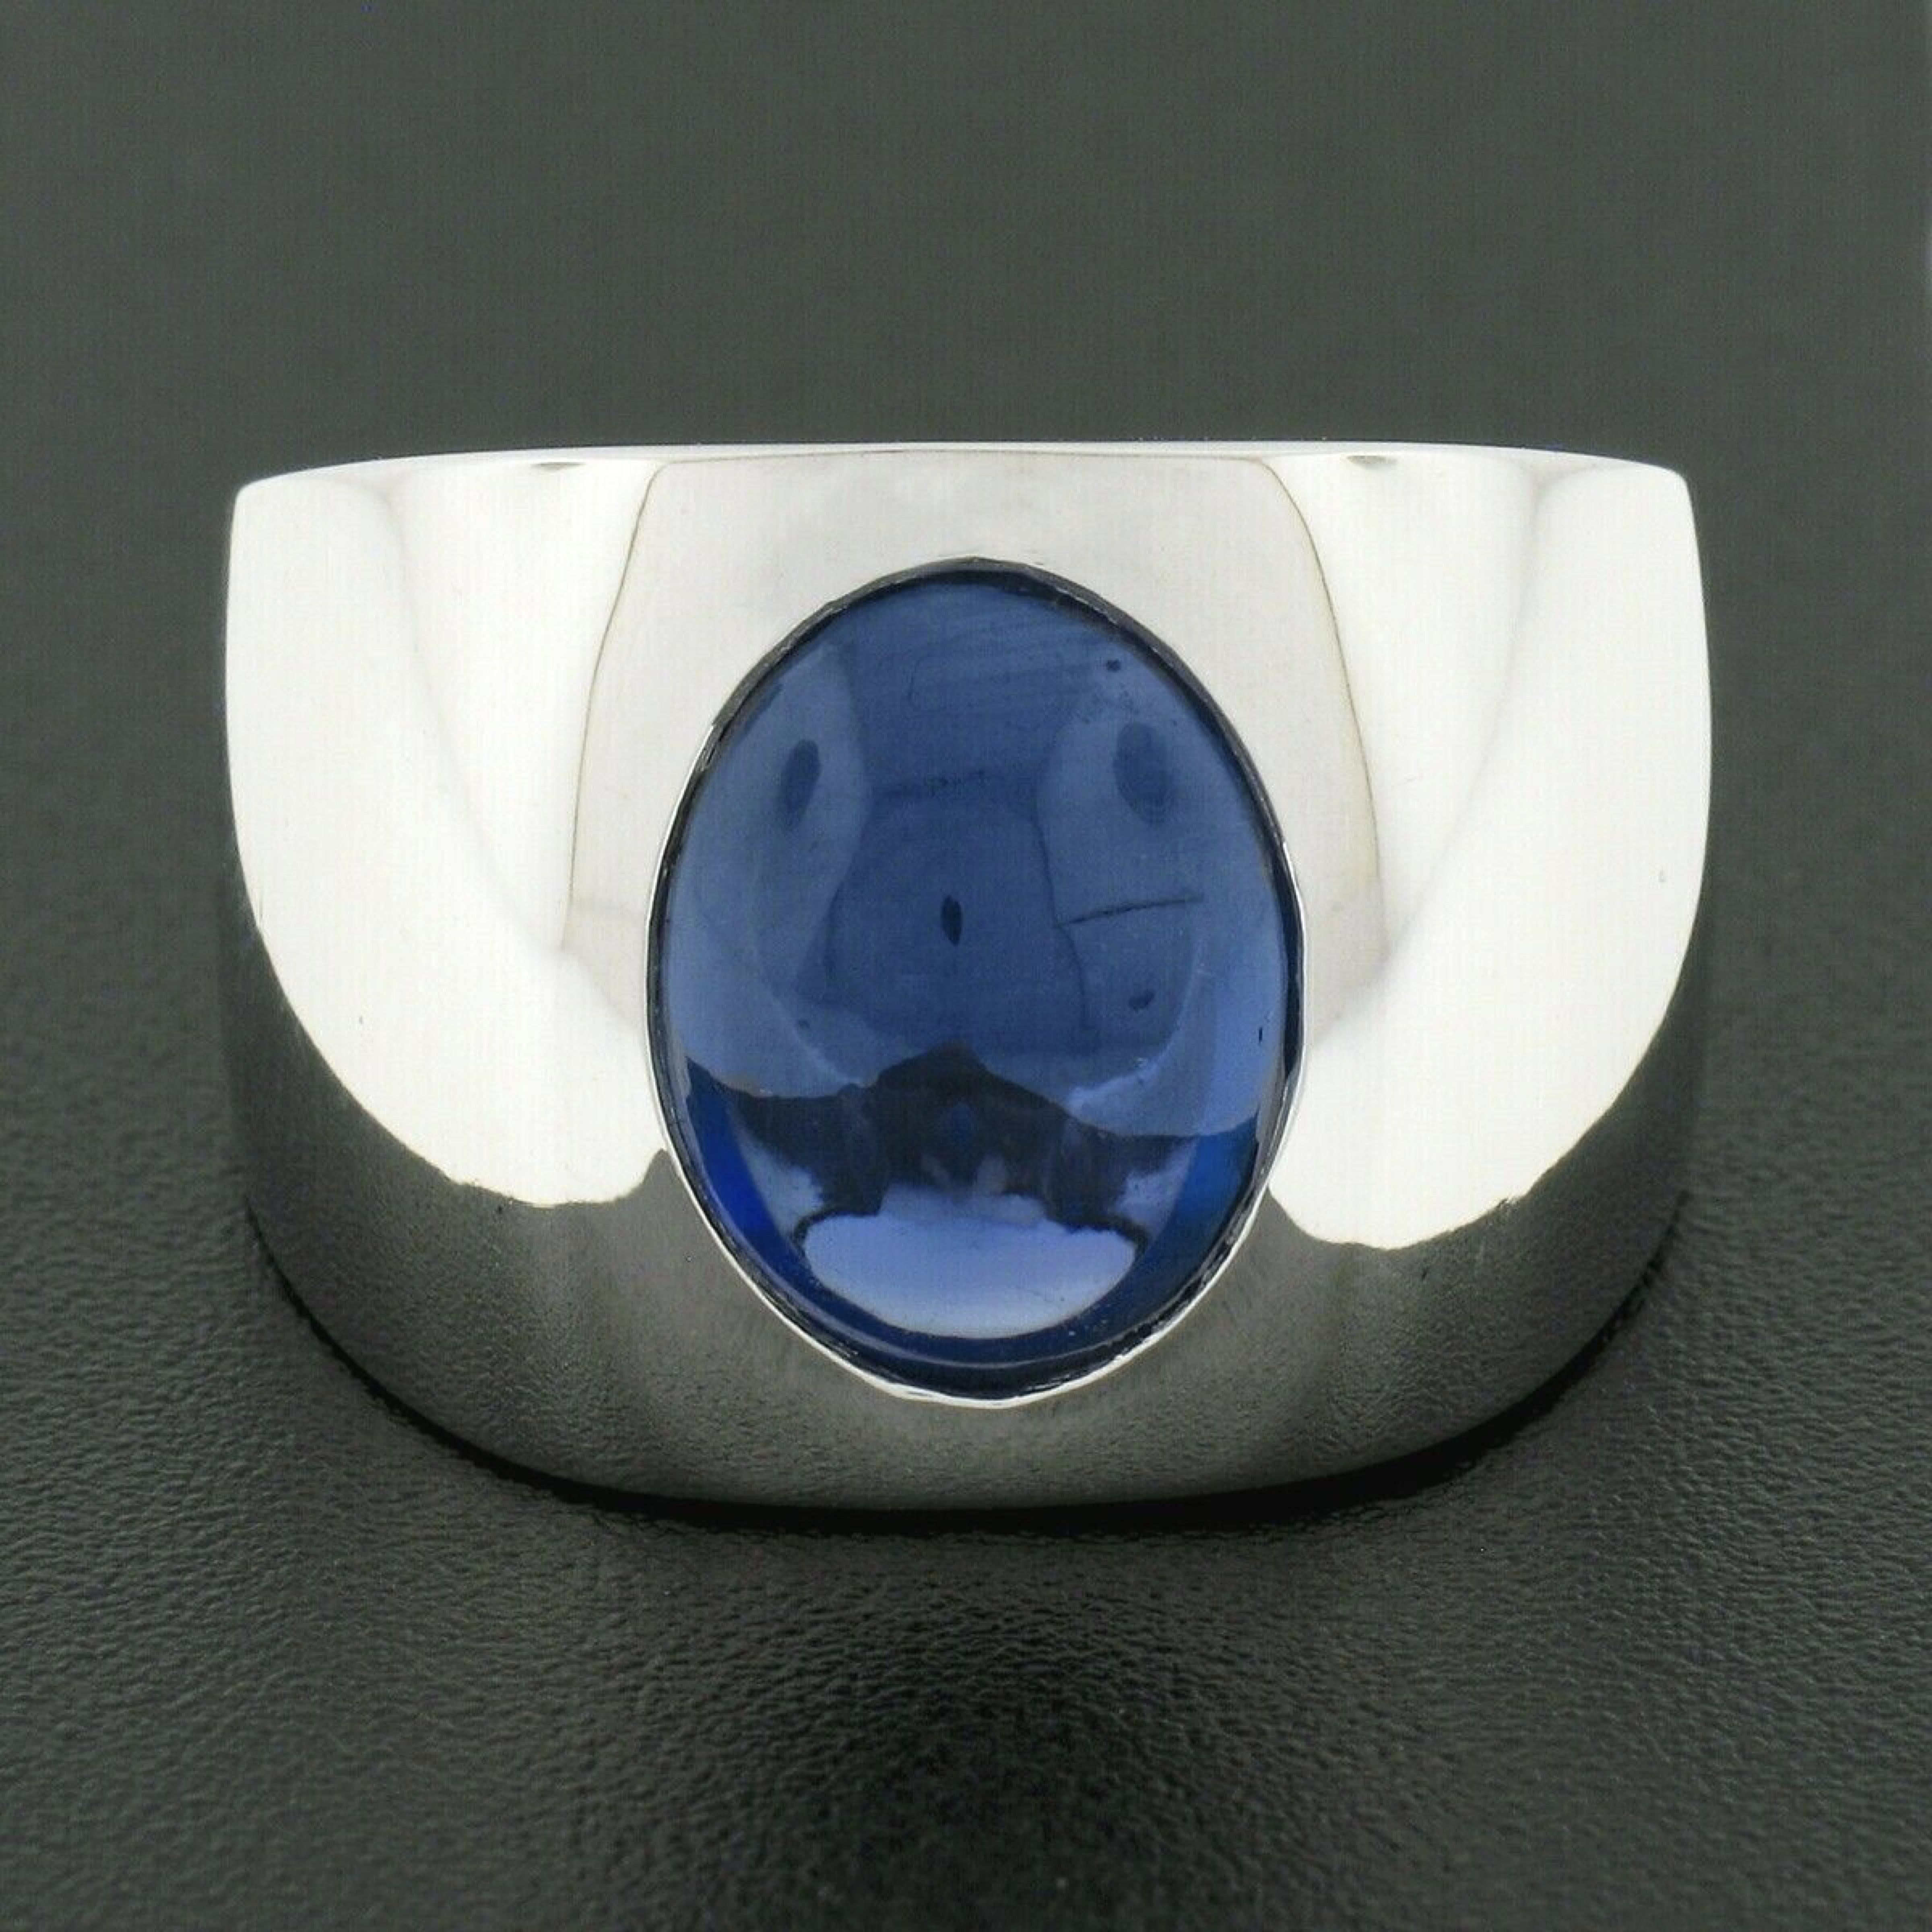 This large and very well made men's statement ring is newly crafted in solid platinum and features a magnificent, Gubelin certified, natural sapphire stone perfectly burnish flush set at its center. The oval cabochon cut sapphire is certified as